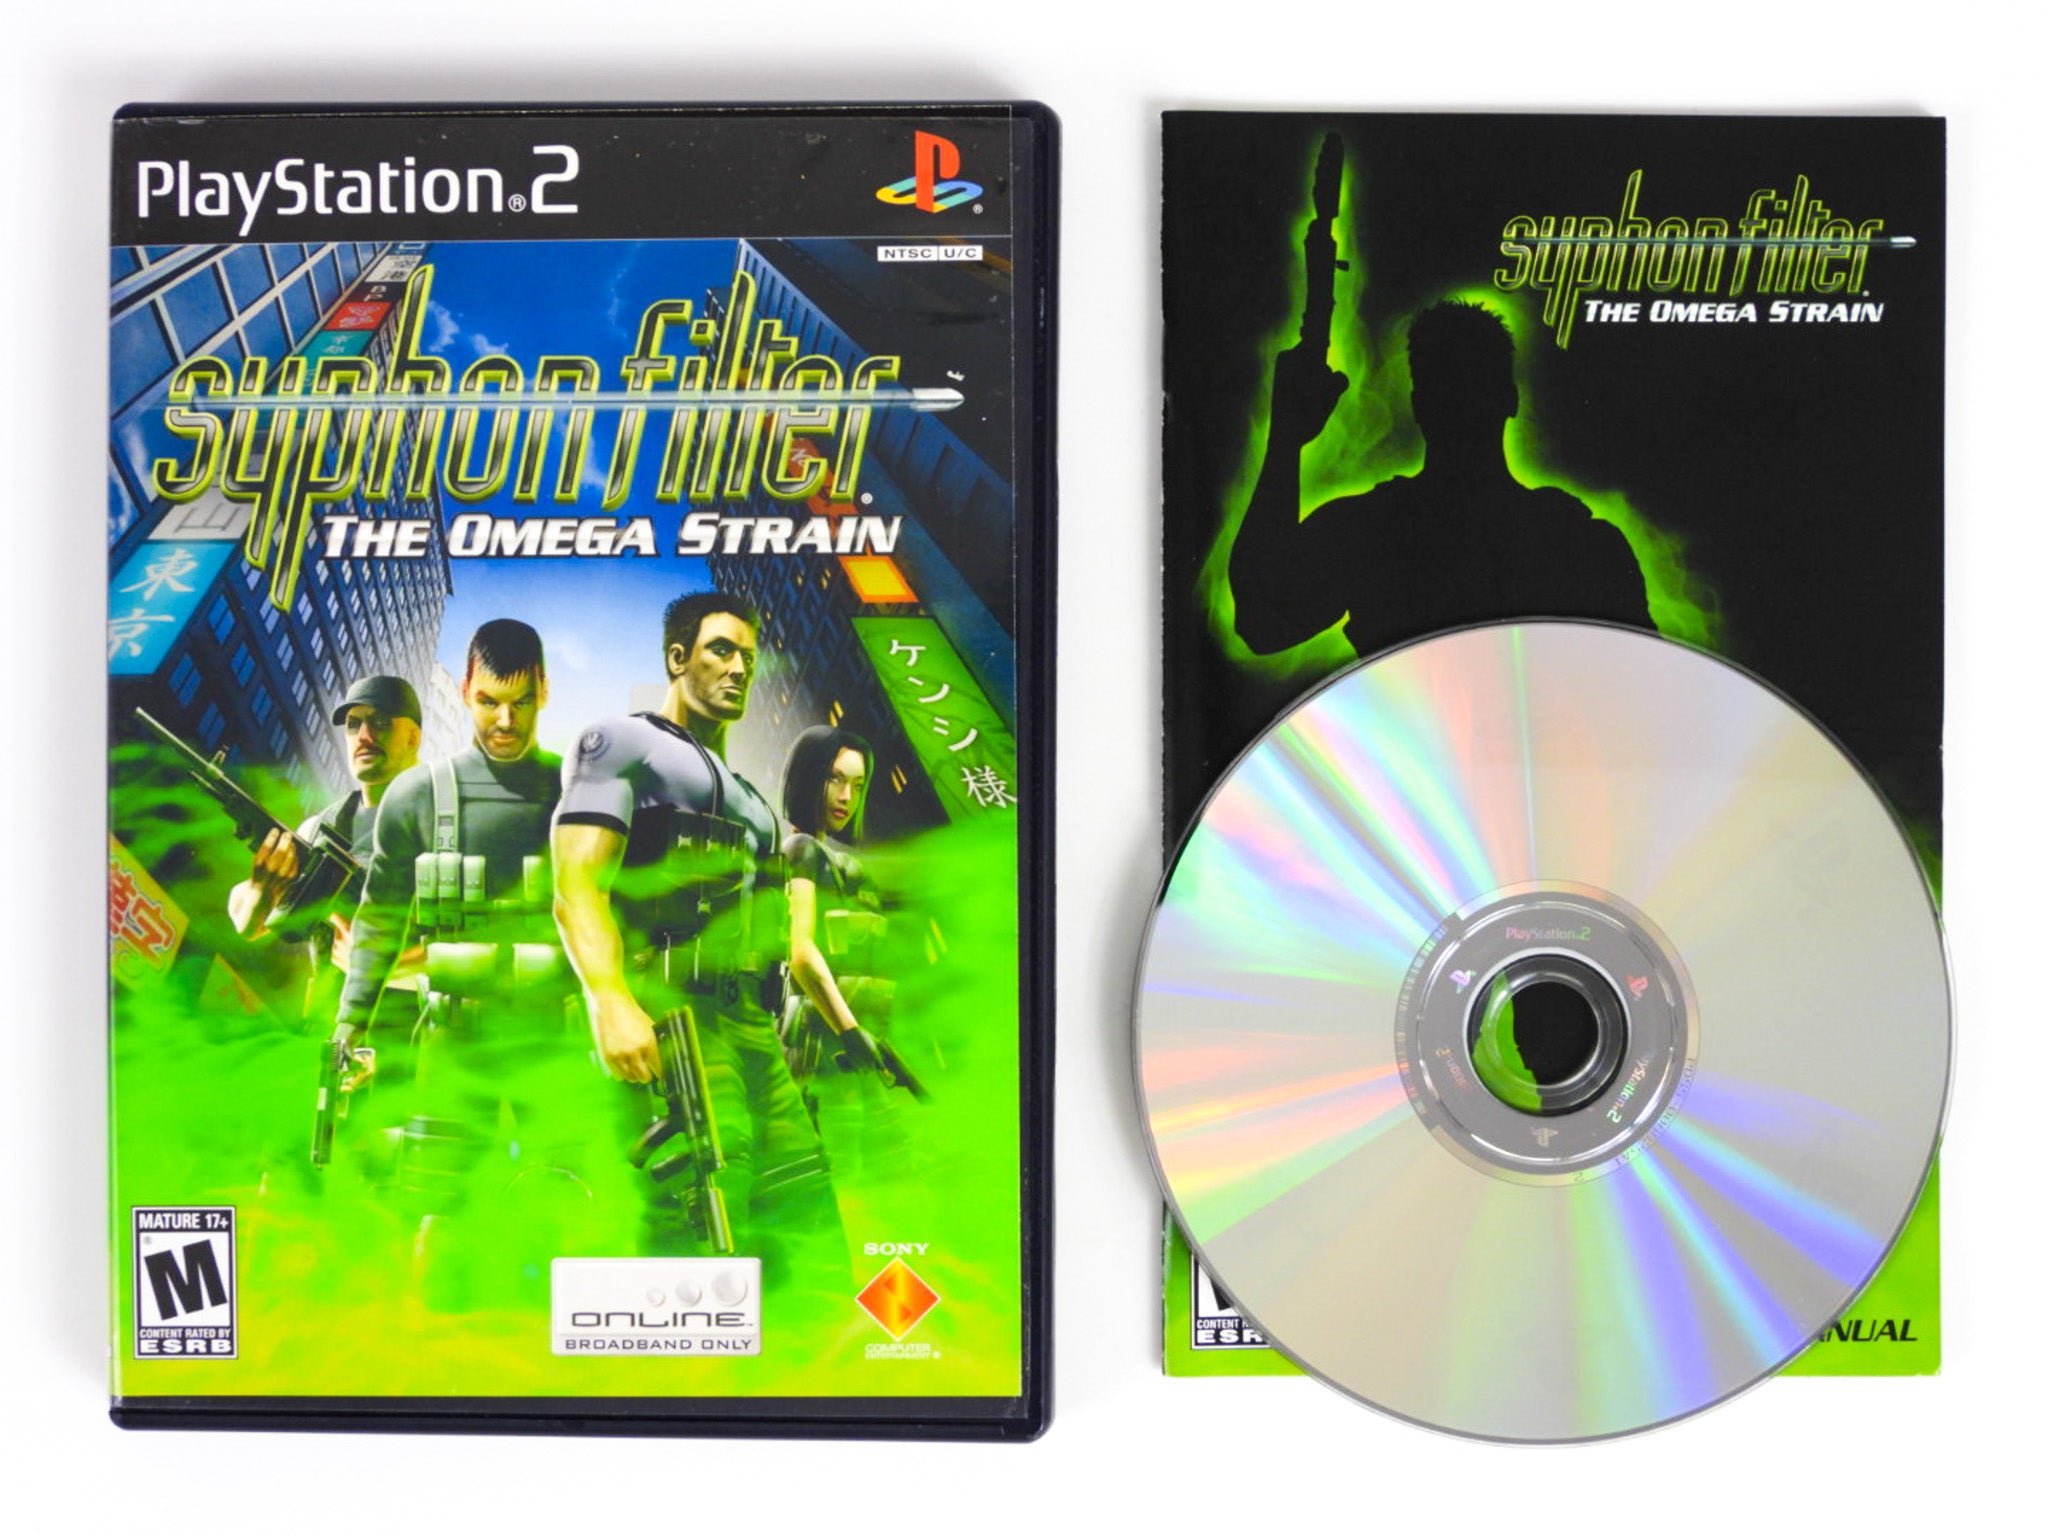 Syphon Filter: The Omega Strain Gameplay On AetherSX2 PS2 Emulator